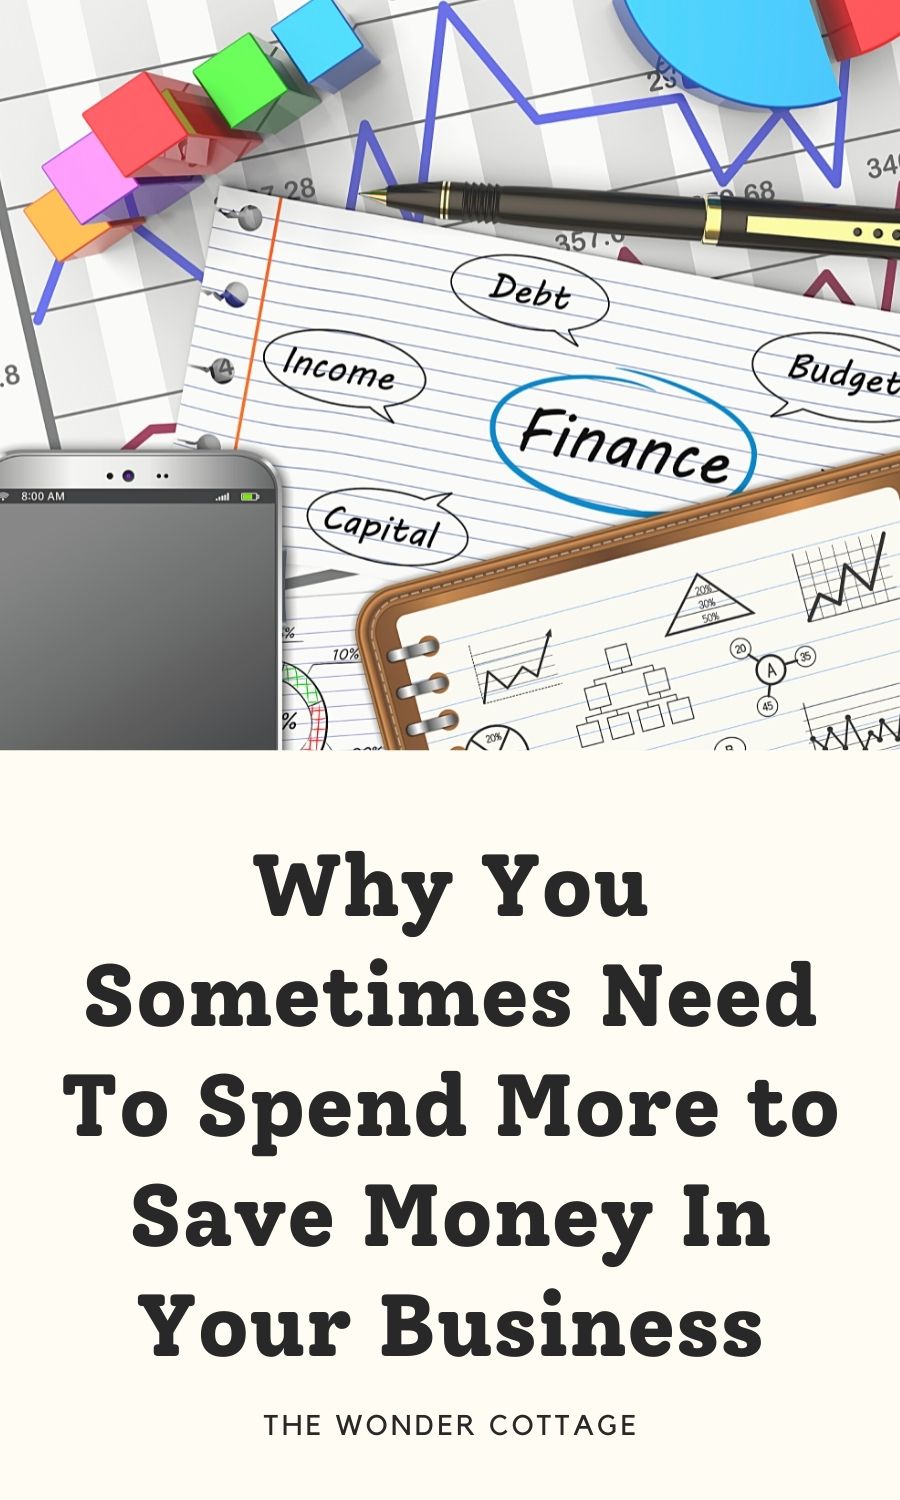 Why You Sometimes Need To Spend More to Save Money In Your Business